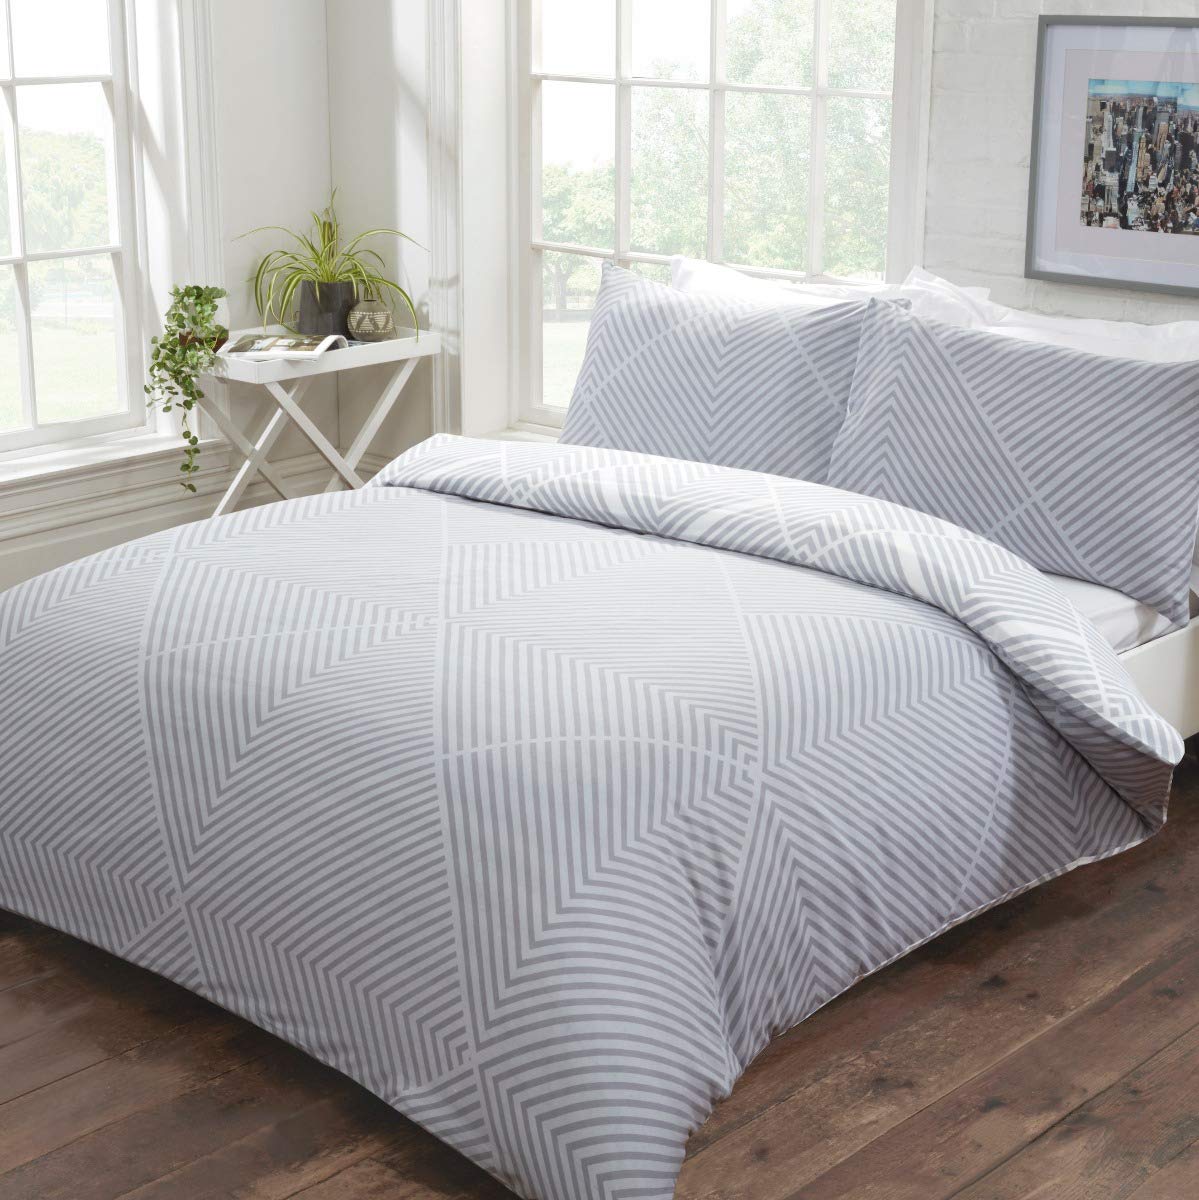 Striped Geo - Reversible Duvet Cover and Pillowcase Set